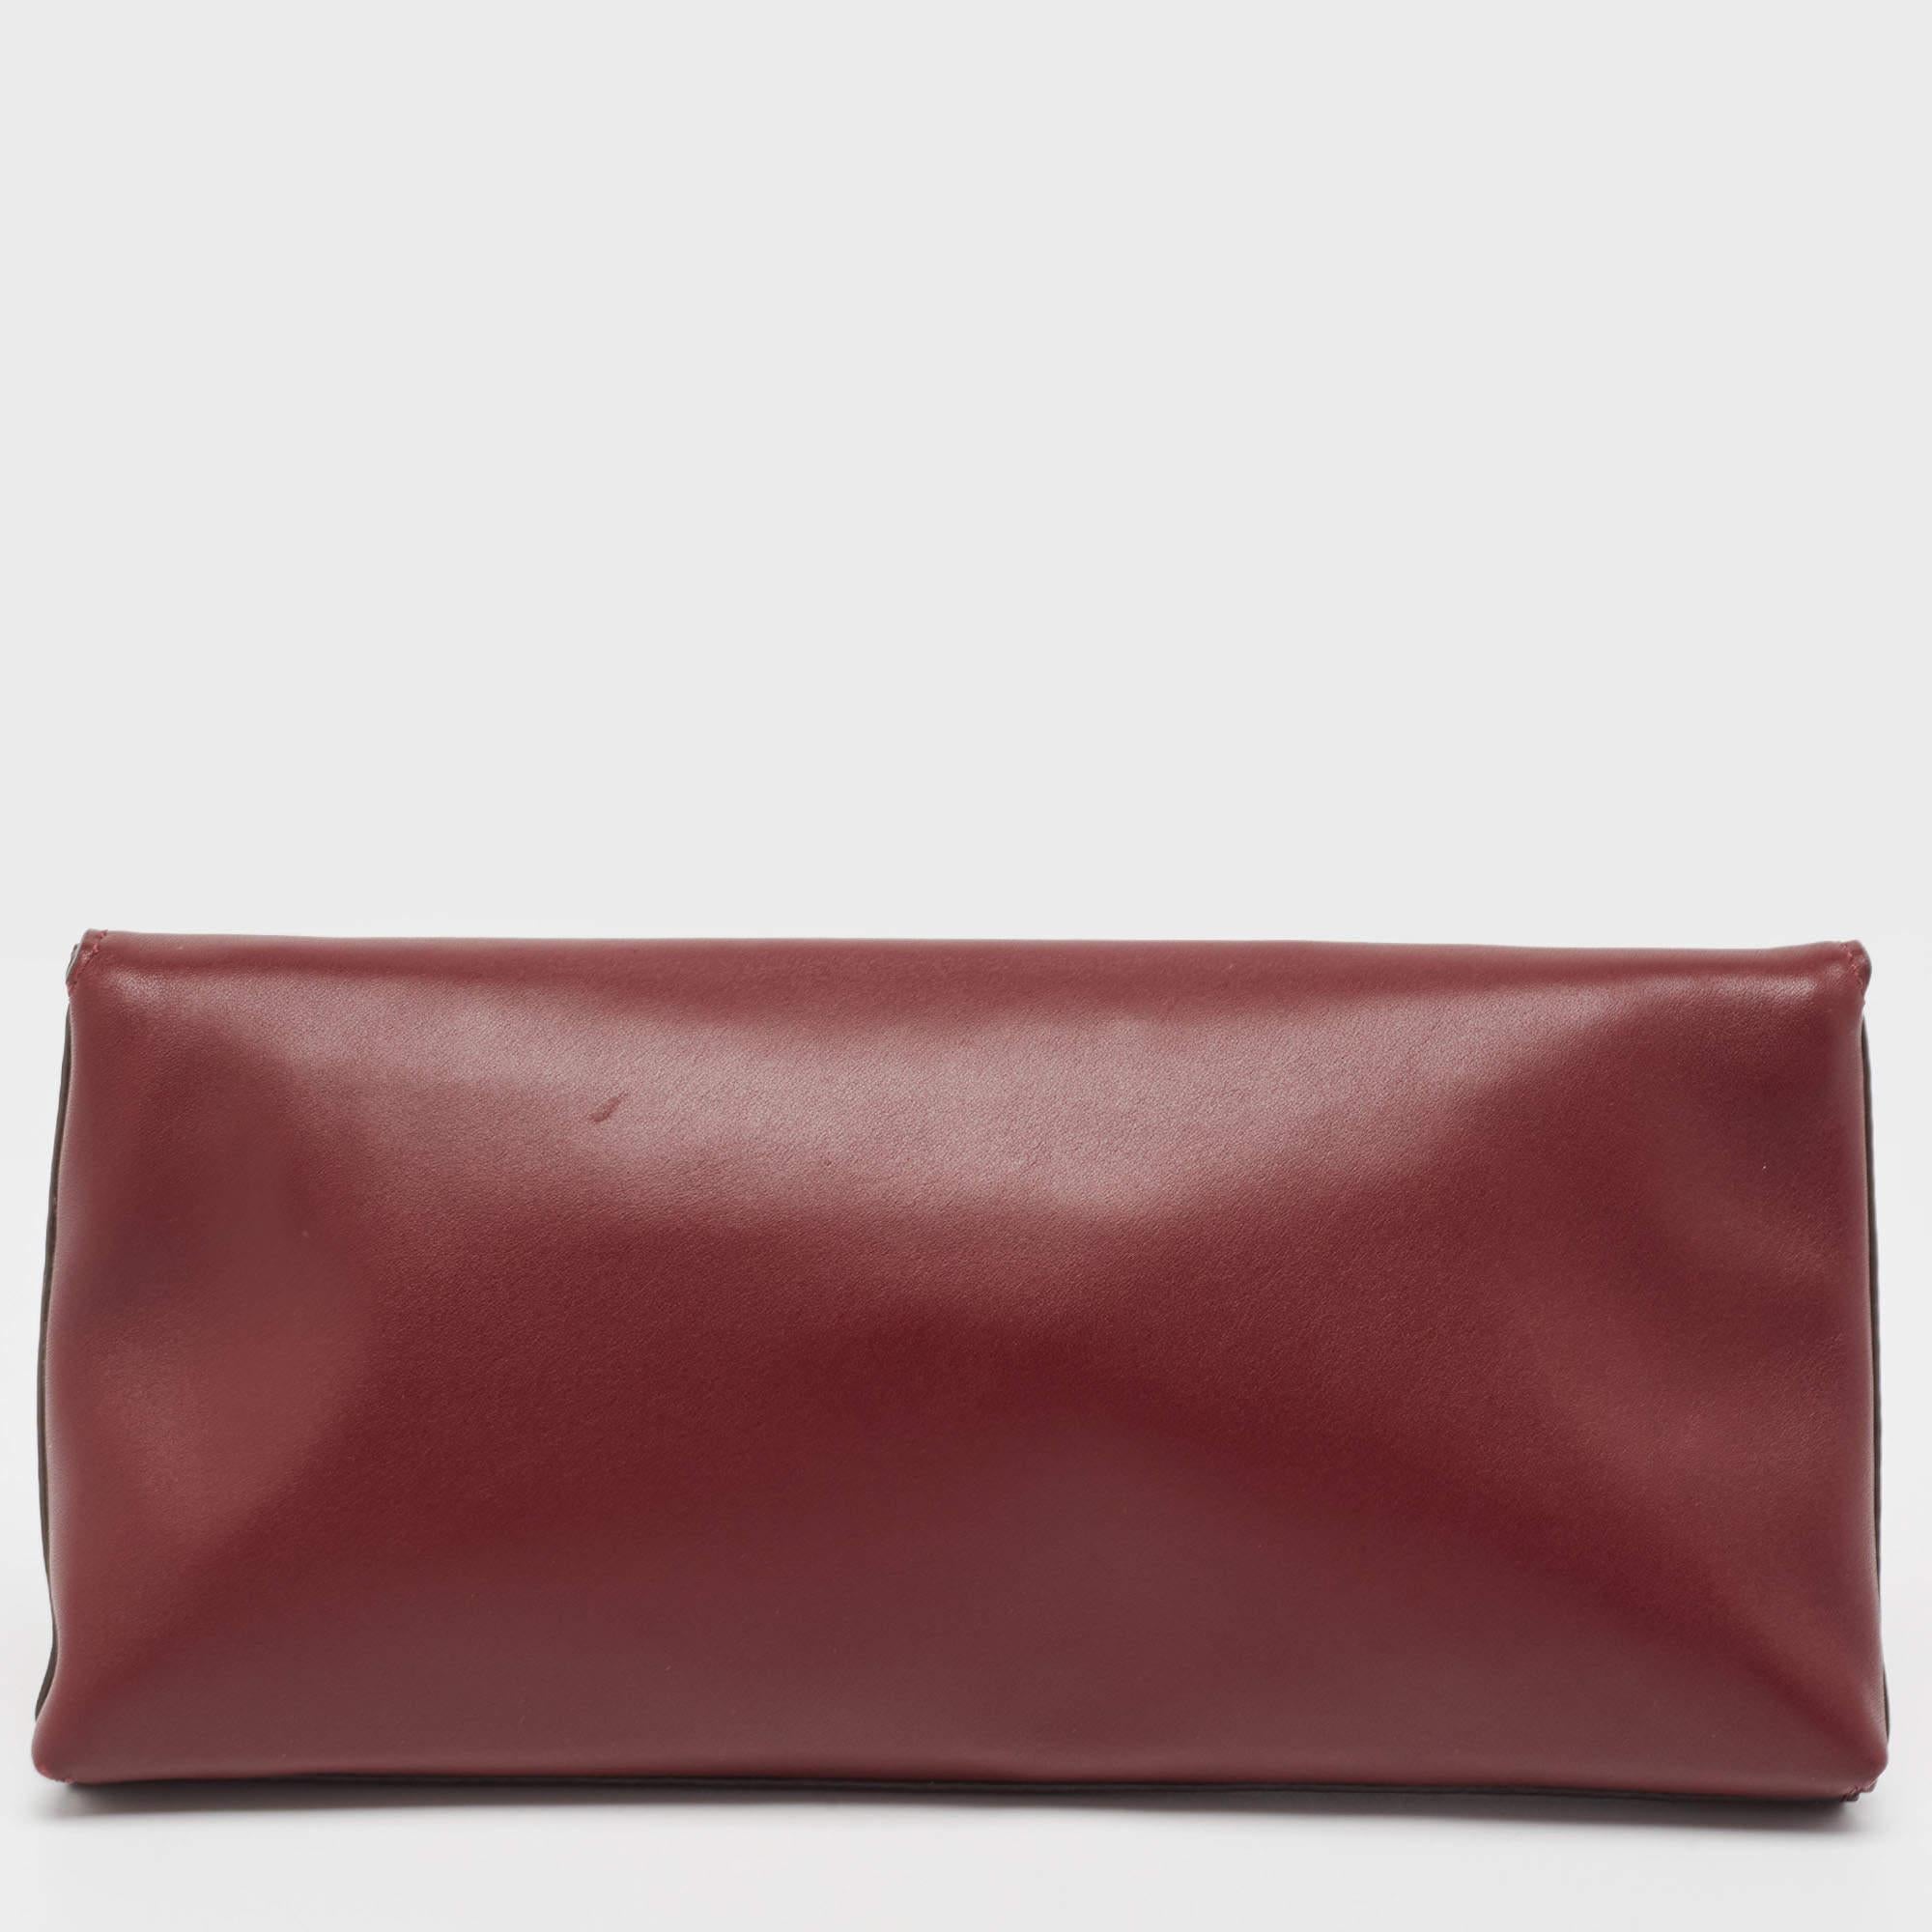 What a cool way to carry your belongings! This Miller clutch from the House of Tory Burch is designed lavishly from burgundy leather with a logo accent on the front. It is embellished with gold-toned hardware and features a canvas-lined